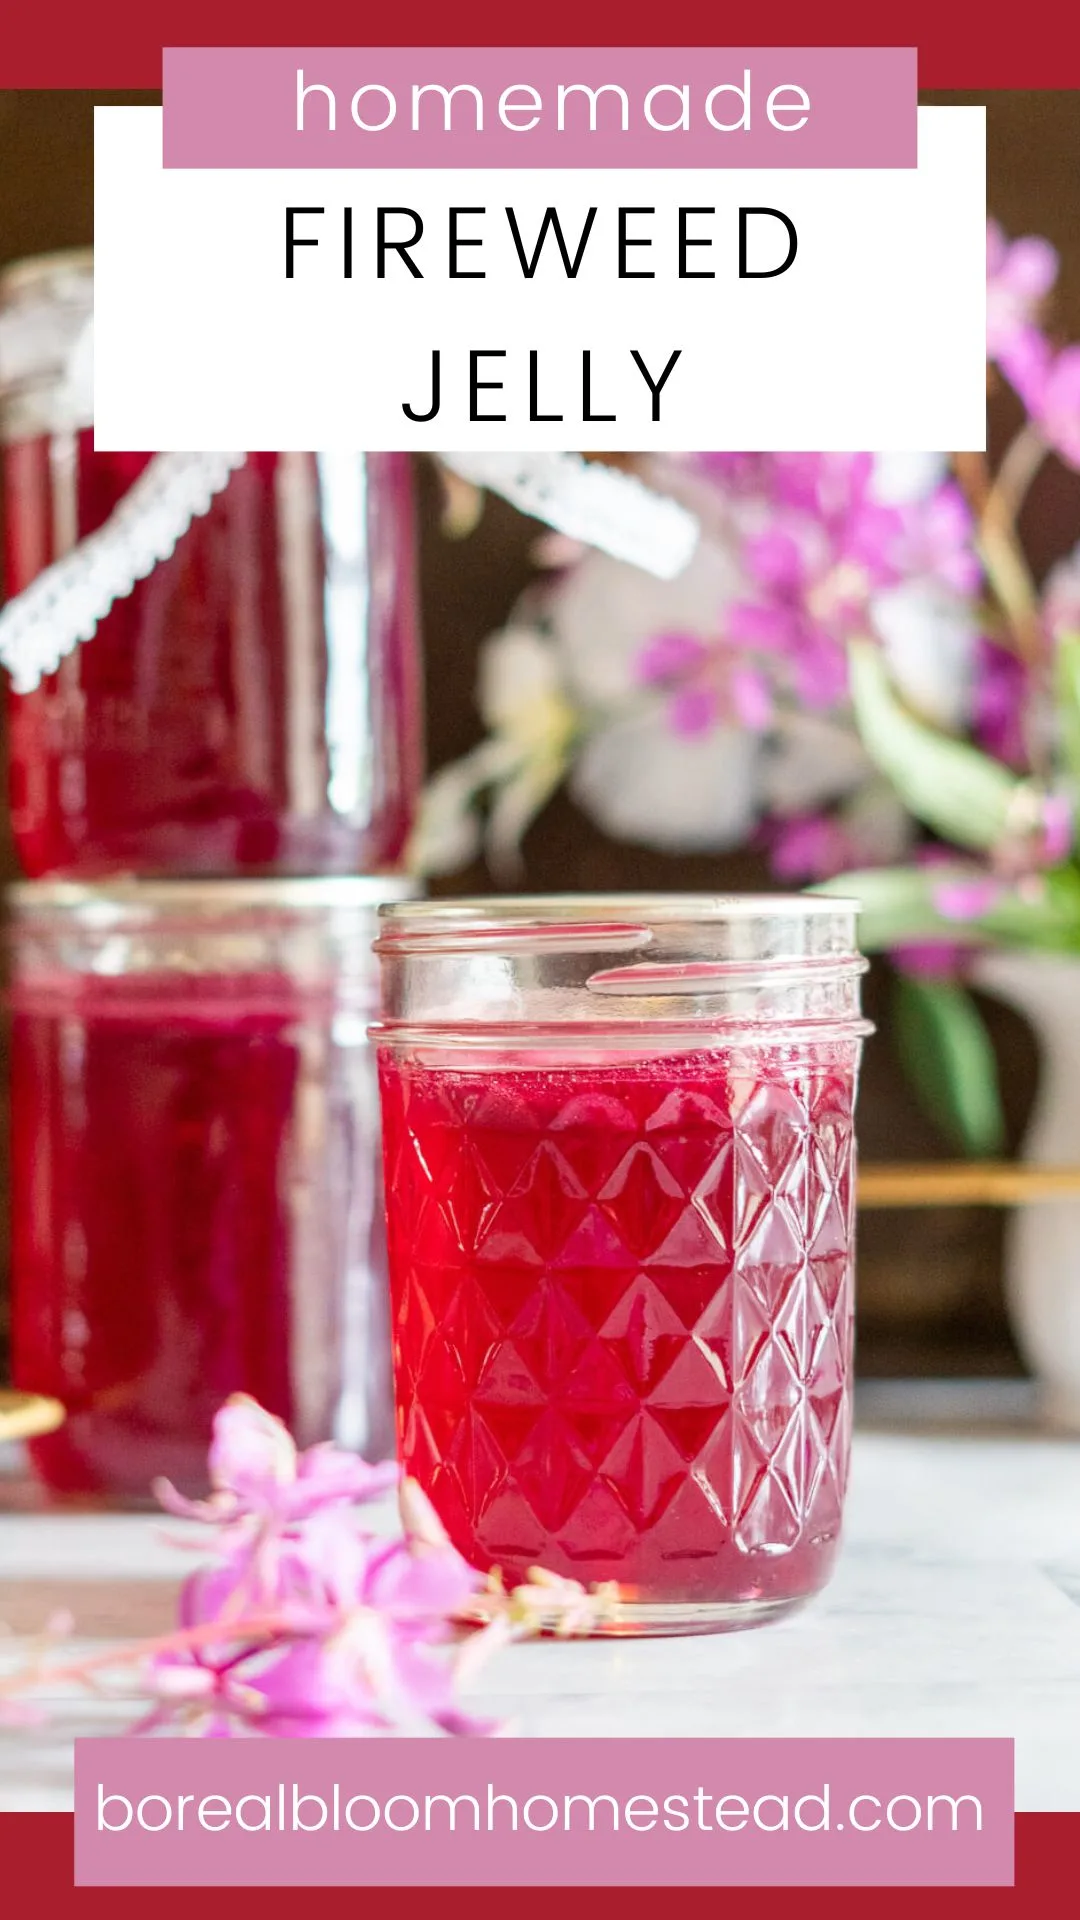 Homemade fireweed jelly pinterest graphic.